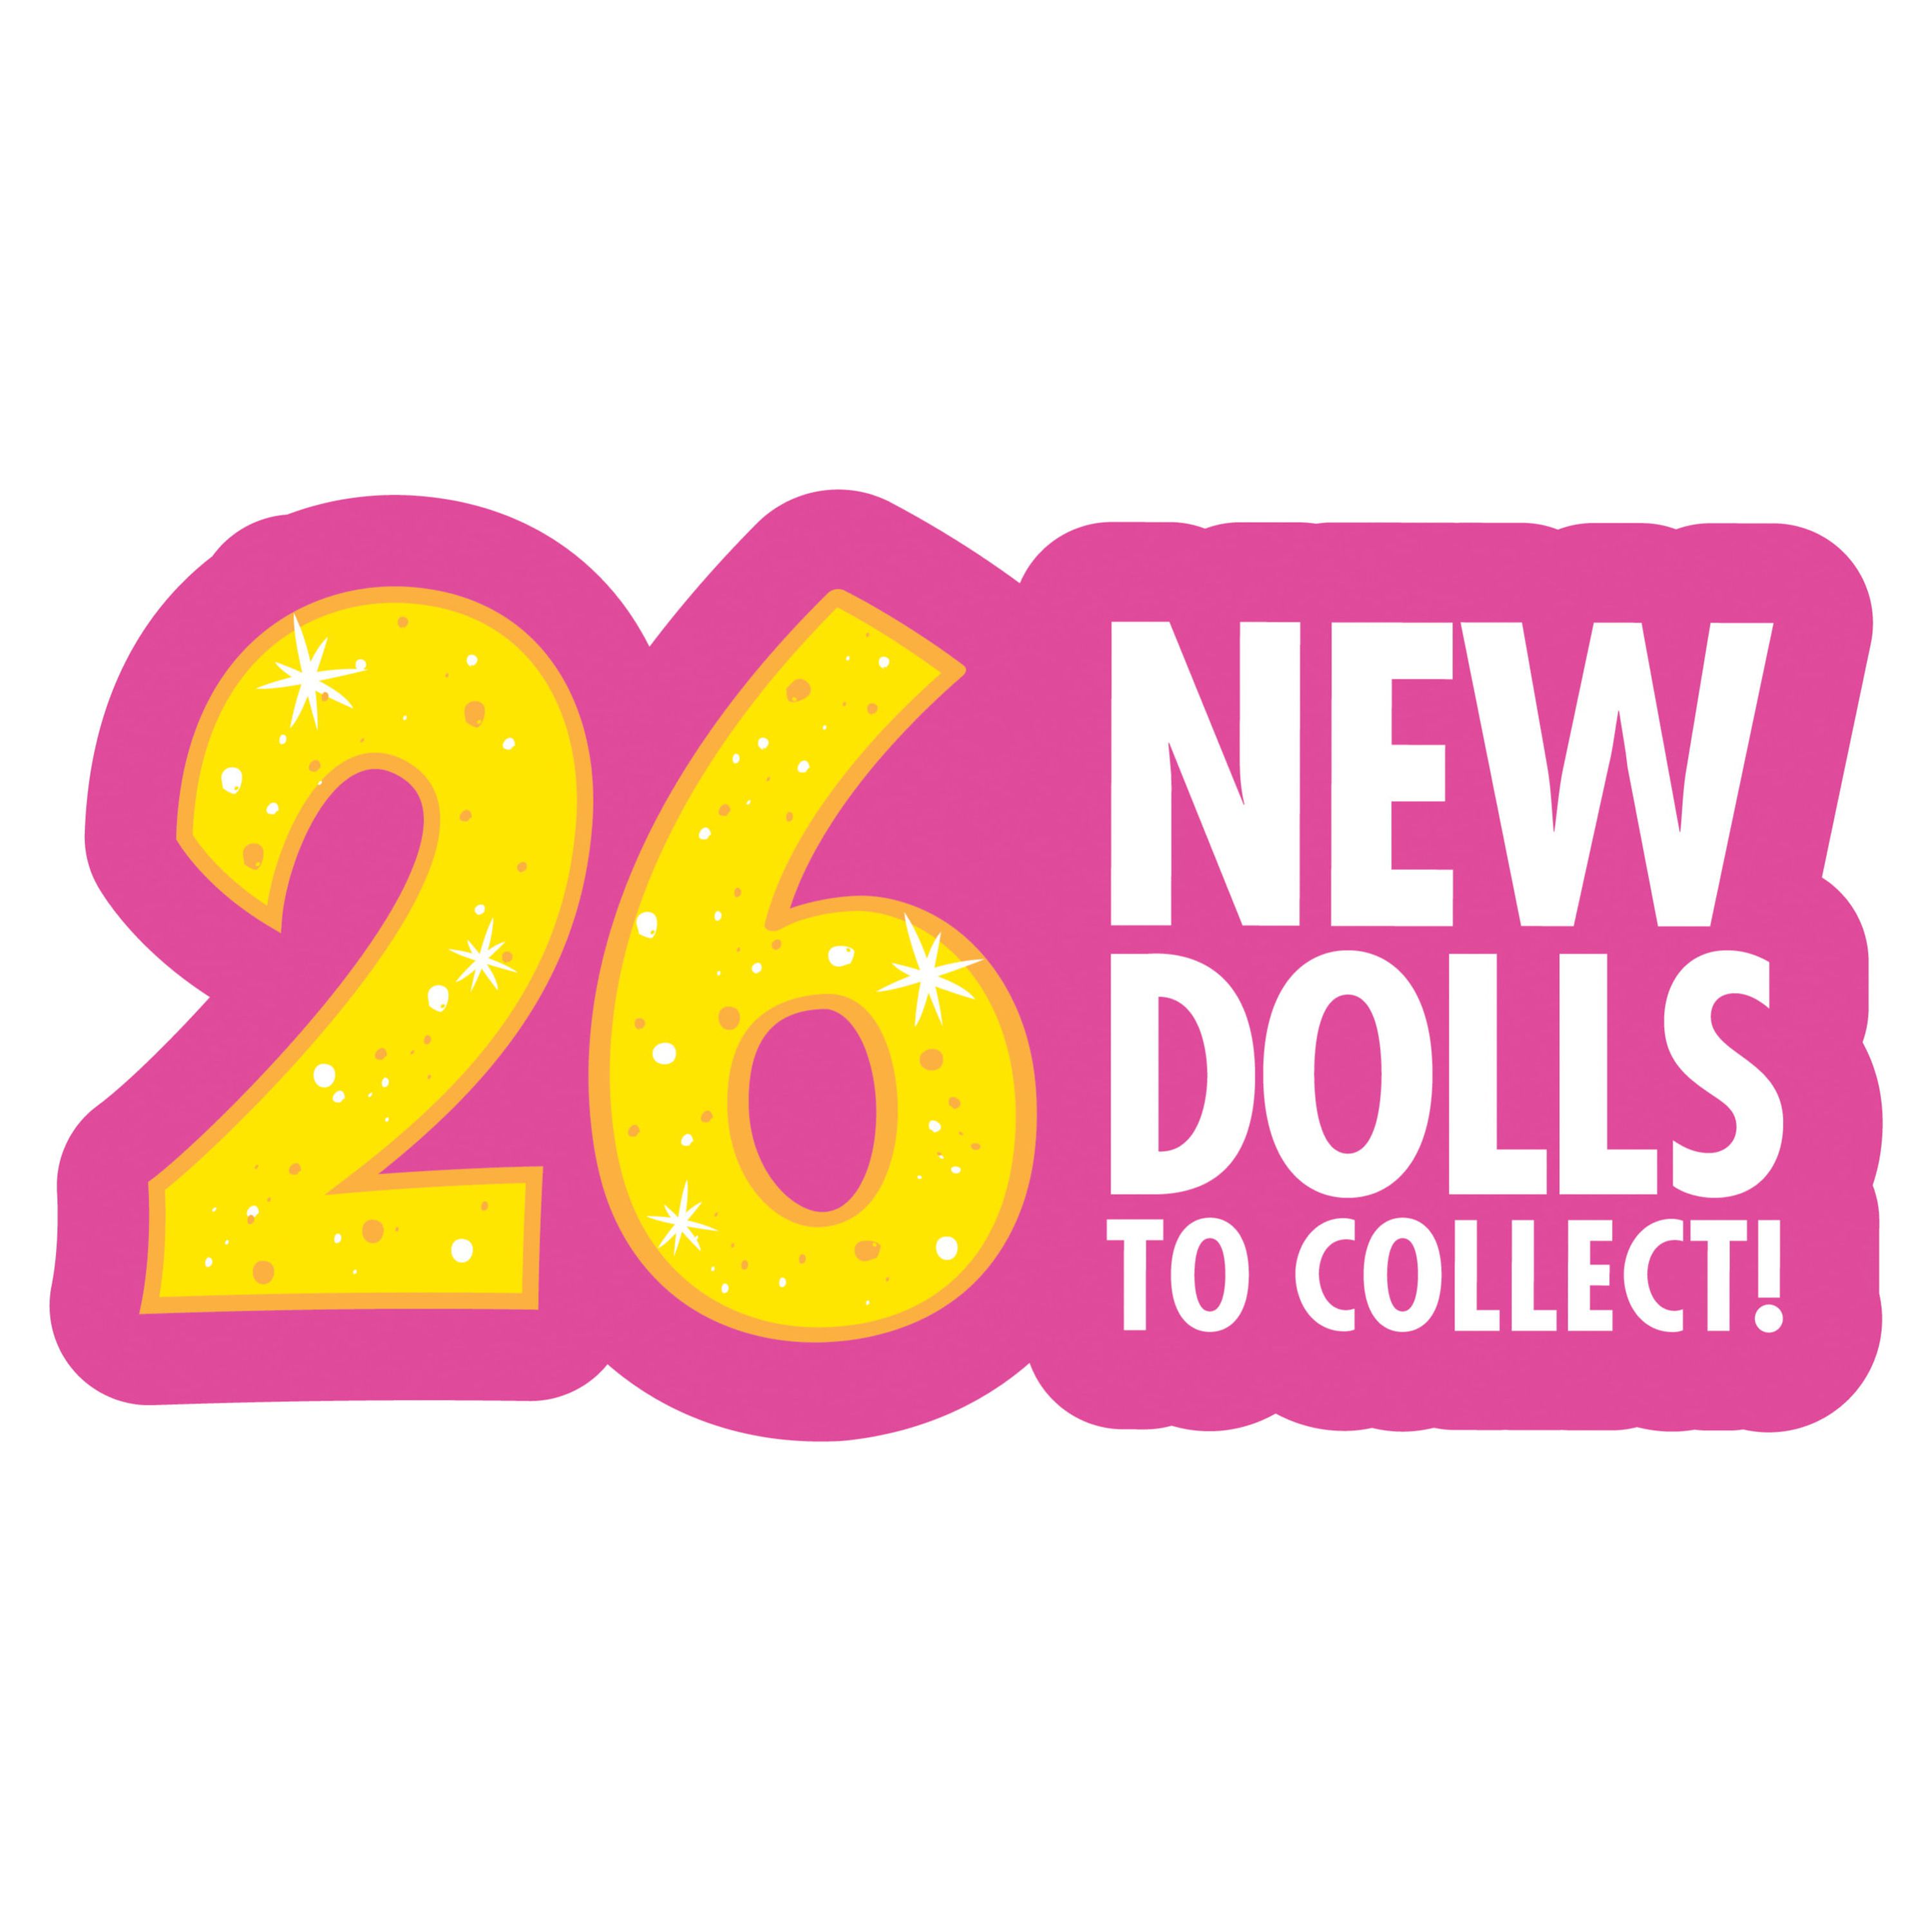 Hairdorables Collectible Doll Hair Art Series 5, styles and case colors may vary, each sold separately,  Kids Toys for Ages 3 Up, Gifts and Presents - image 5 of 8